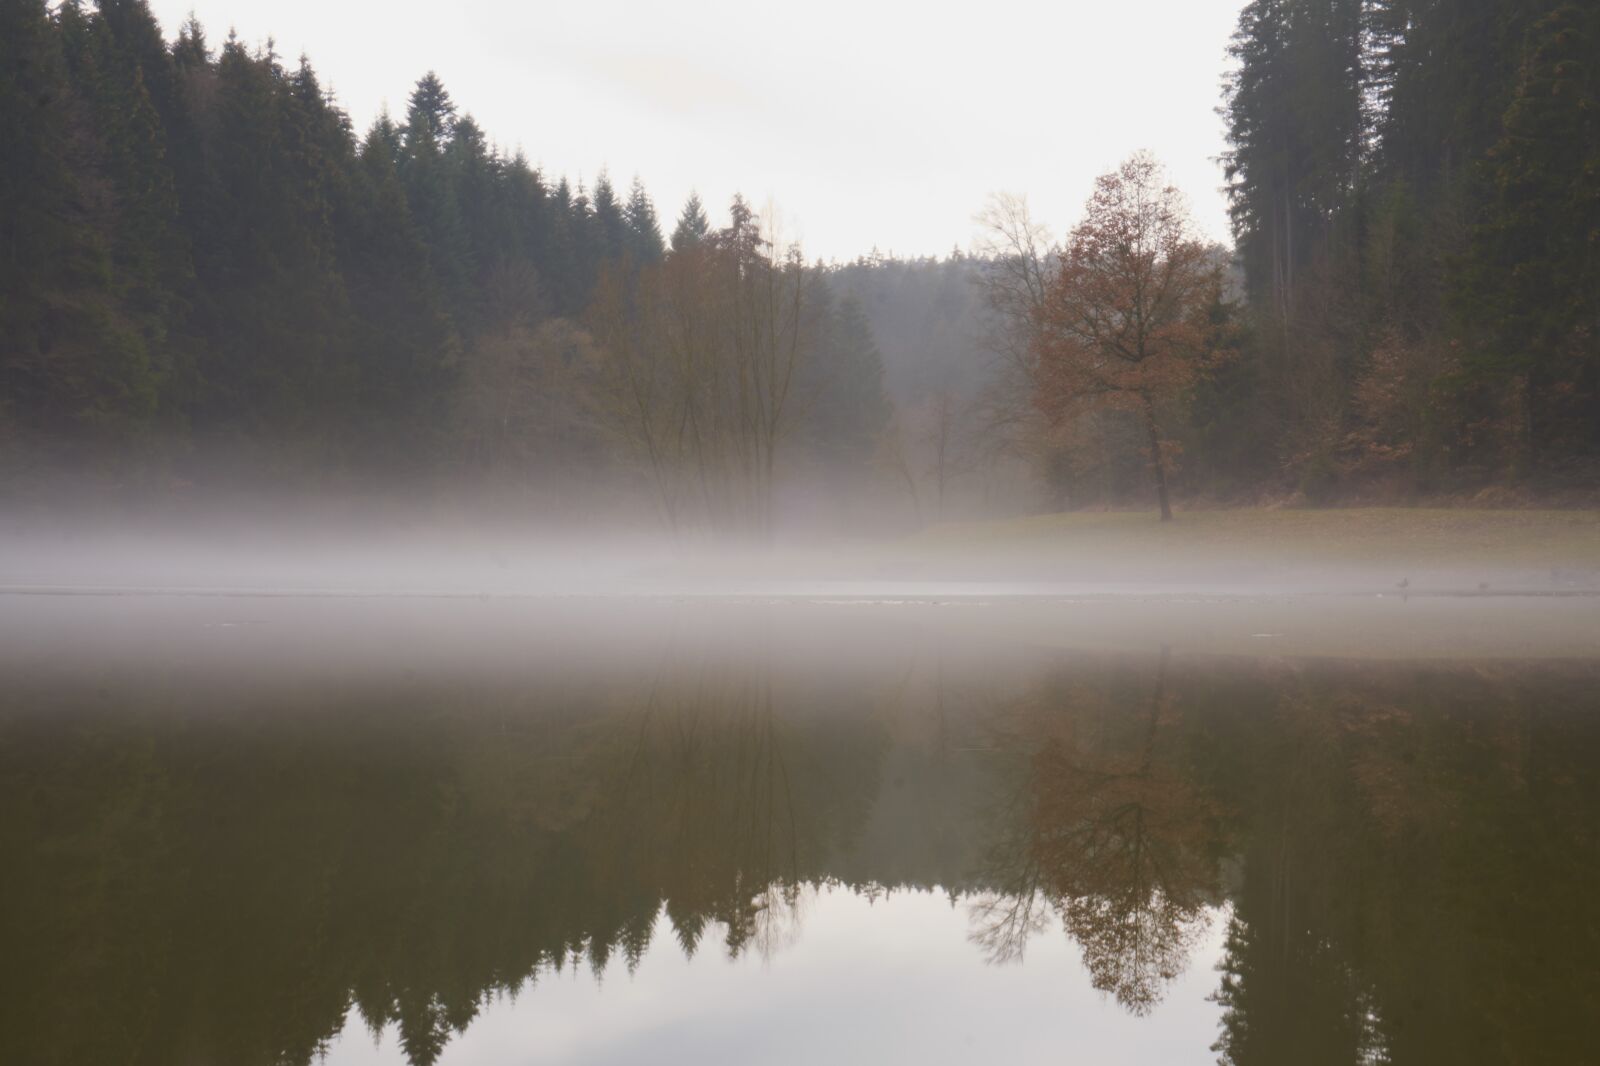 Sony a6000 + Sony E PZ 16-50 mm F3.5-5.6 OSS (SELP1650) sample photo. Lake, fog, forest photography